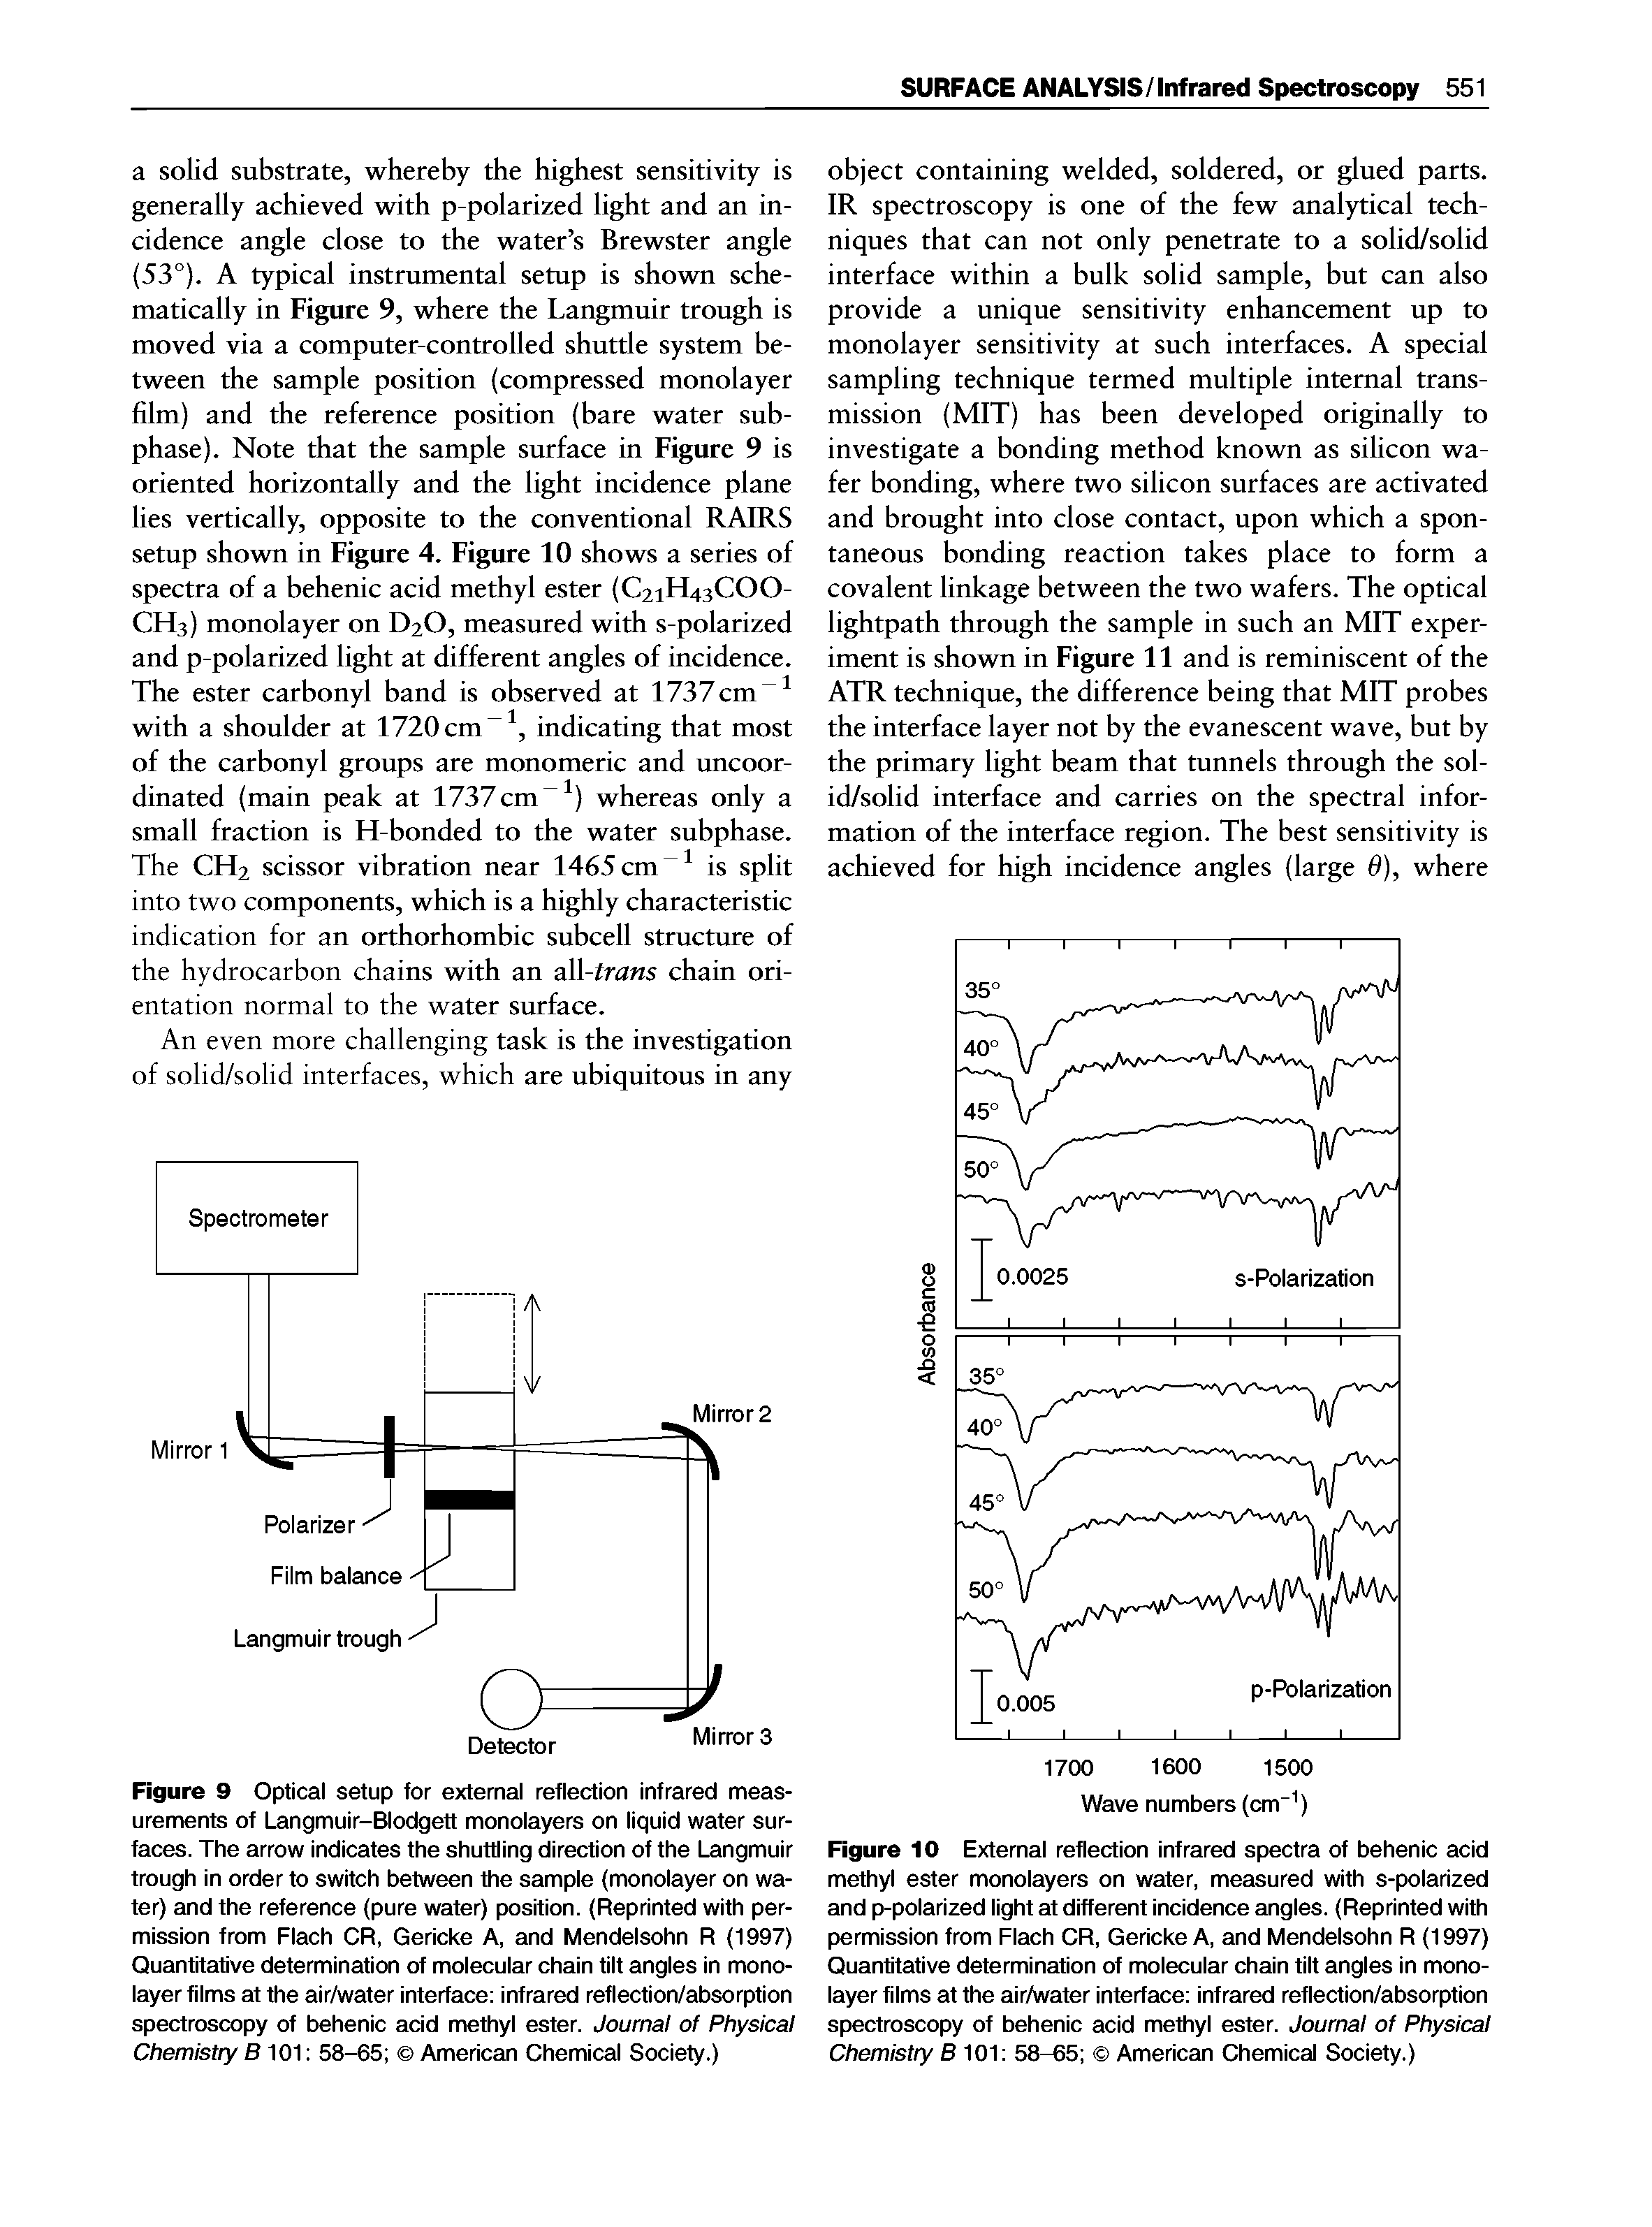 Figure 9 Optical setup for external reflection infrared measurements of Langmuir-Blodgett monolayers on liquid water surfaces. The arrow indicates the shuttling direction of the Langmuir trough in order to switch between the sample (monolayer on water) and the reference (pure water) position. (Reprinted with permission from Flach CR, Gericke A, and Mendelsohn R (1997) Quantitative determination of molecular chain tilt angles in mono-layer films at the air/water interface infrared reflection/absorption spectroscopy of behenic acid methyl ester. Journal of Physical Chemistry S 101 58-65 American Chemical Society.)...